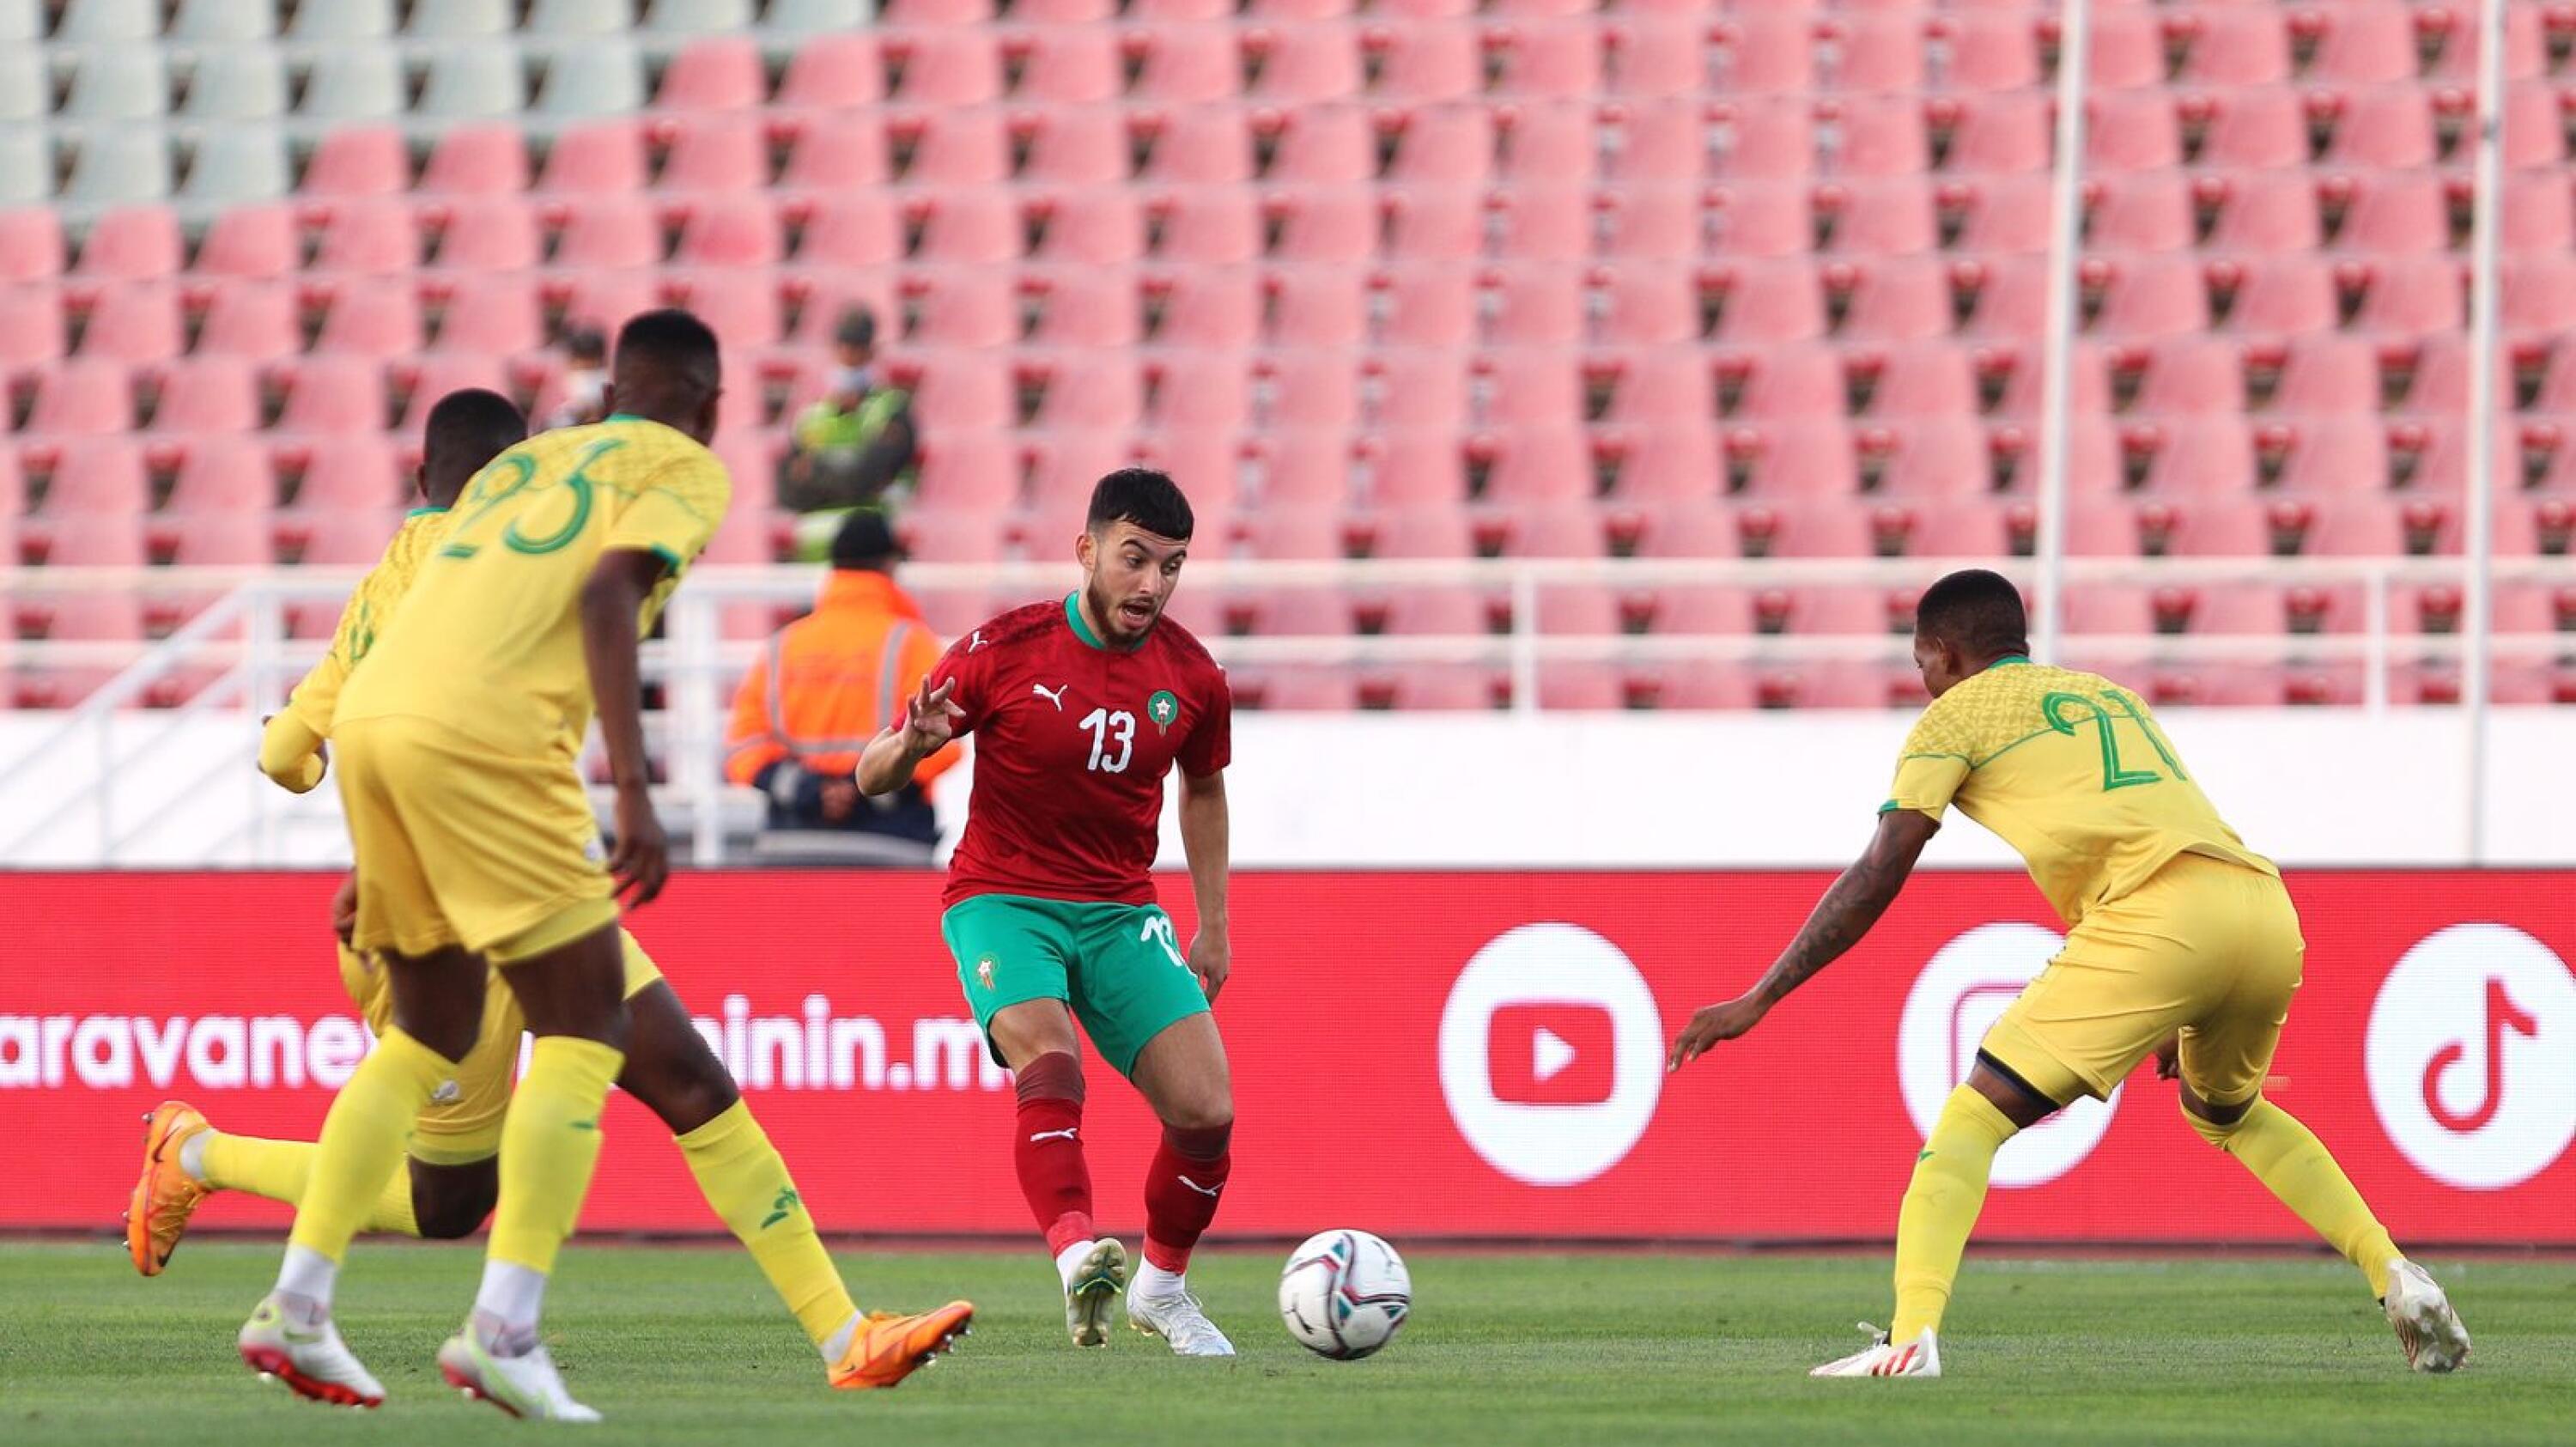 Ilias Chair of Morocco attempts to get through the South African defence during their 2023 Africa Cup of Nations qualifying football match at the Stade Prince Moulay Abdallah in Rabat, Morocco on Thursday